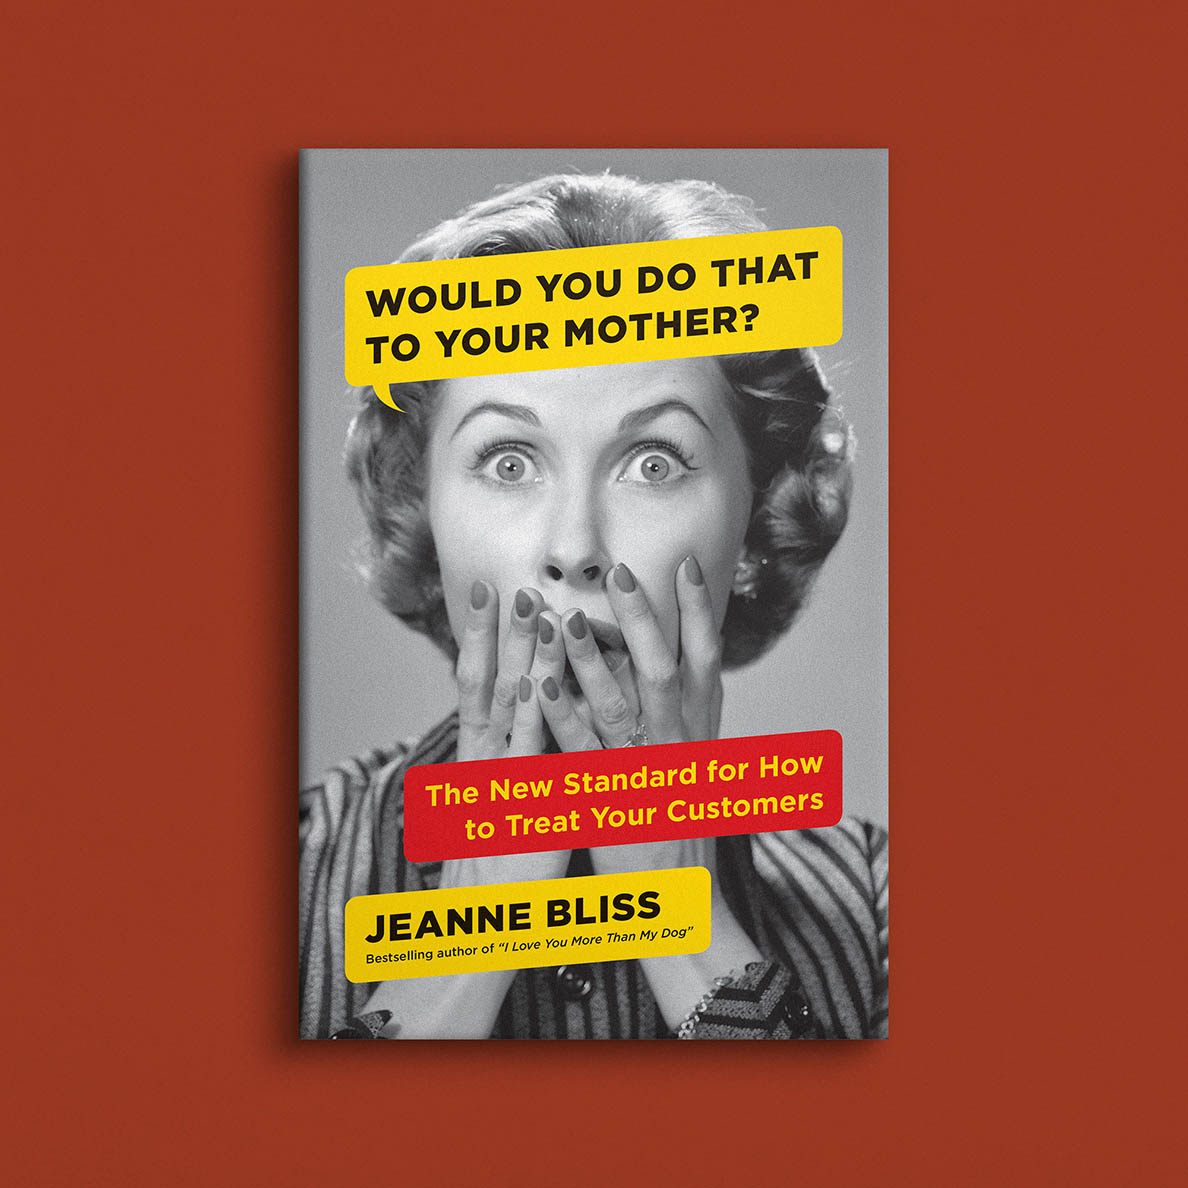 Would You Do That to Your Mother? book cover